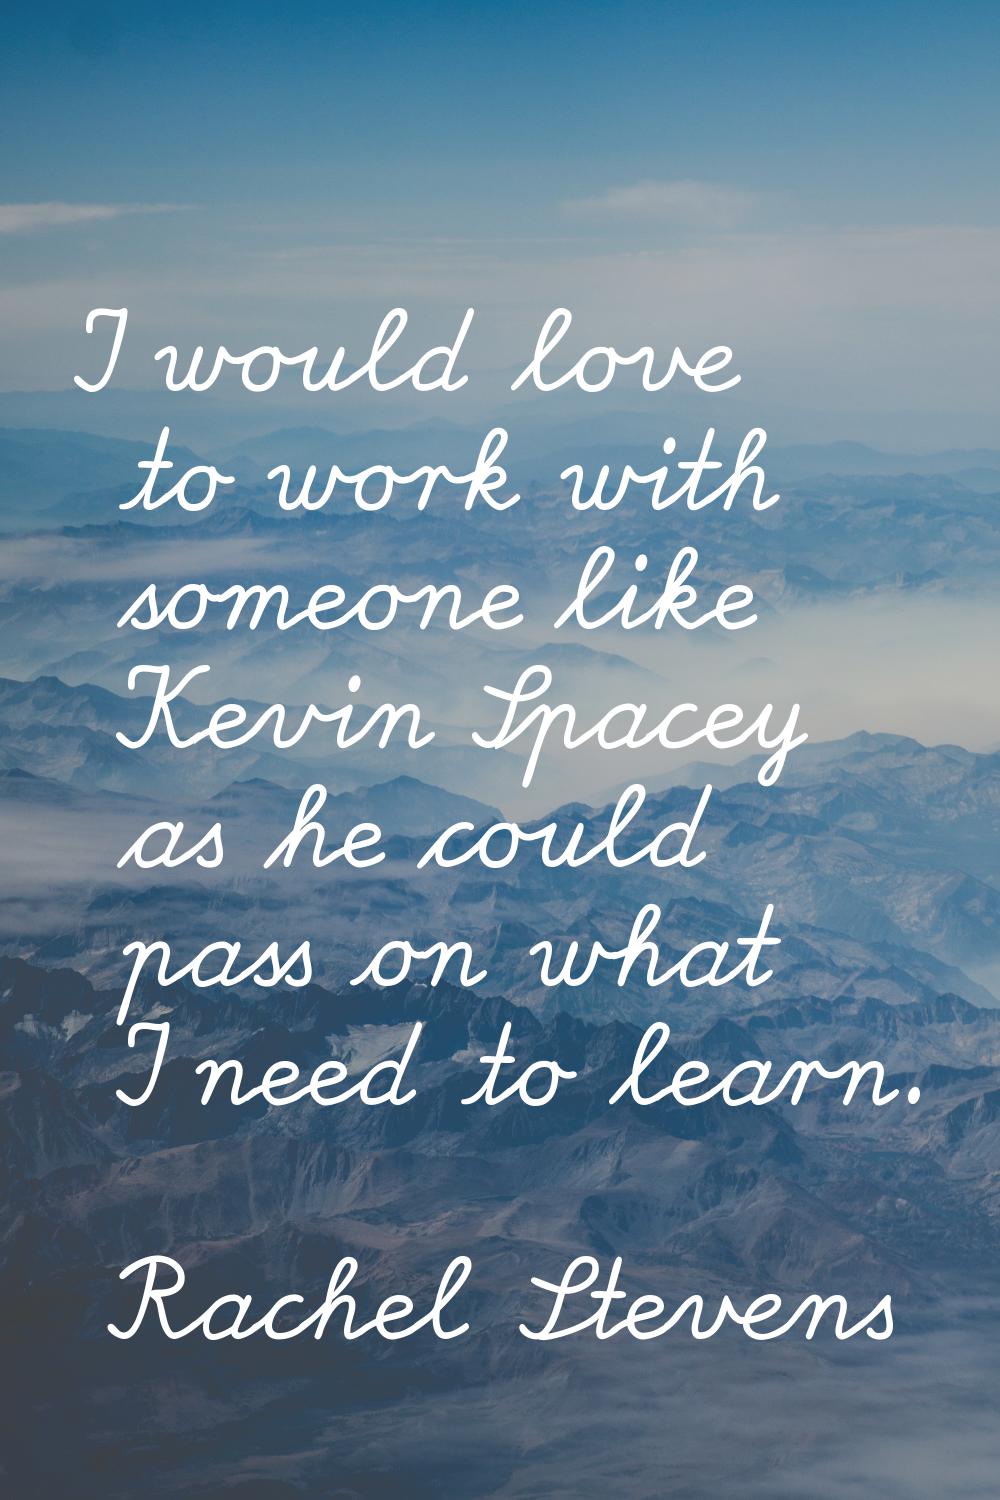 I would love to work with someone like Kevin Spacey as he could pass on what I need to learn.